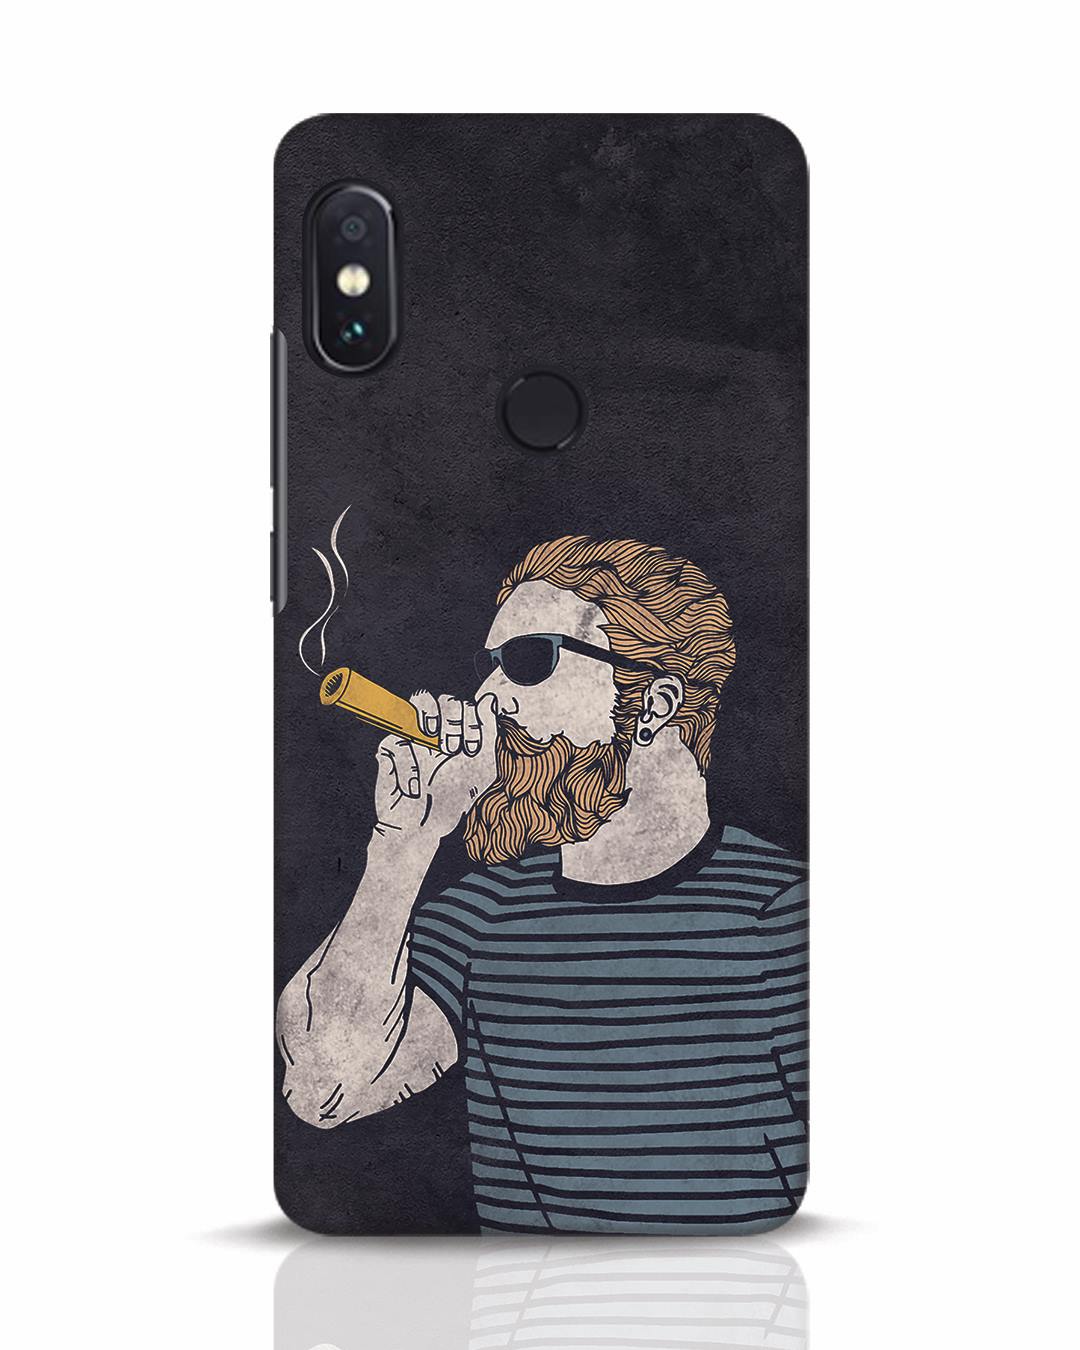 Xiaomi Redmi Note 5 Pro Mobile Covers Cases High Dude Mobile Cover